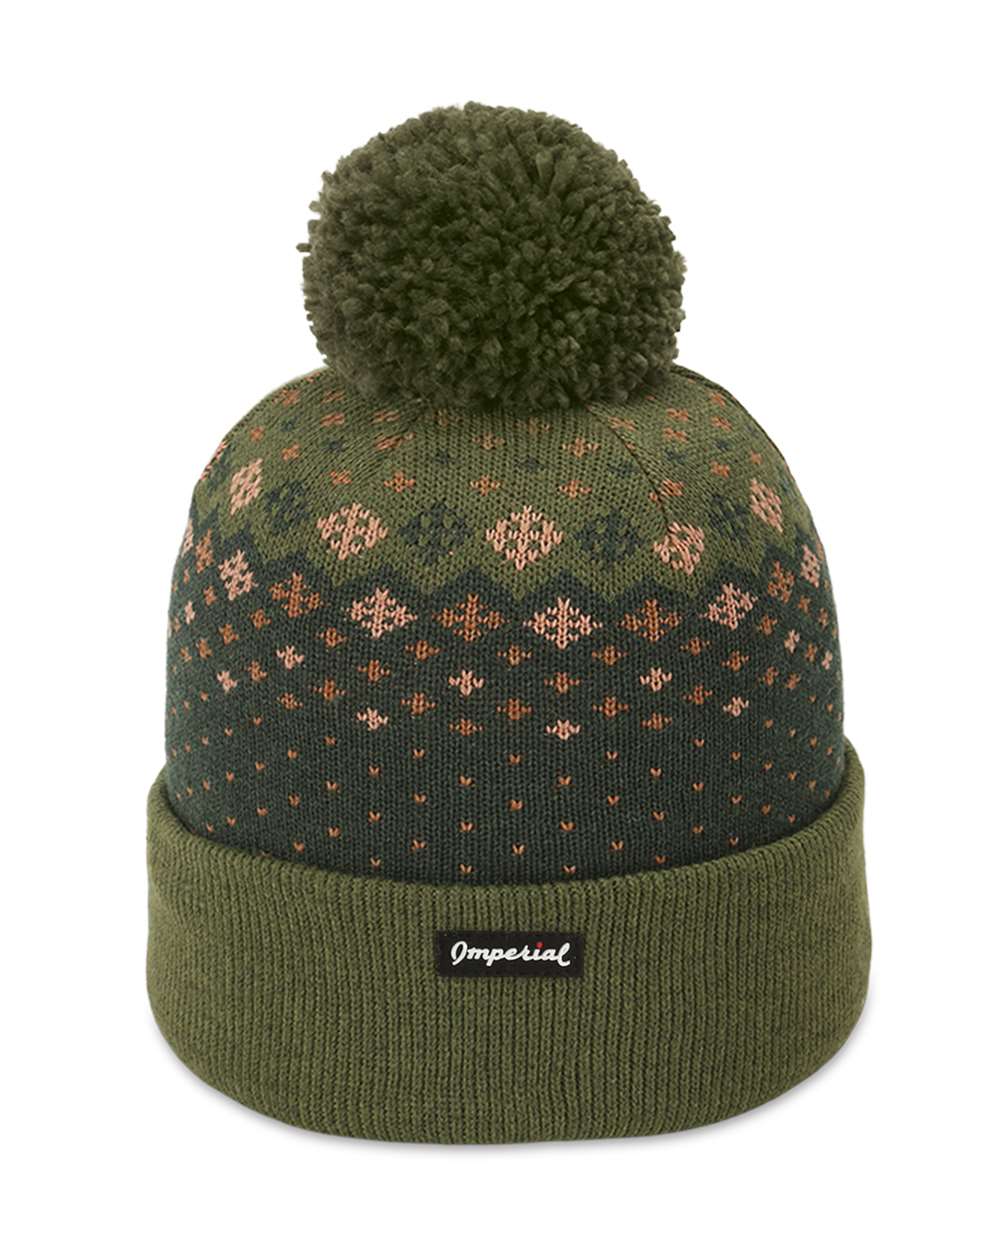 Imperial 6017 - Tha Baniff Knit Hat